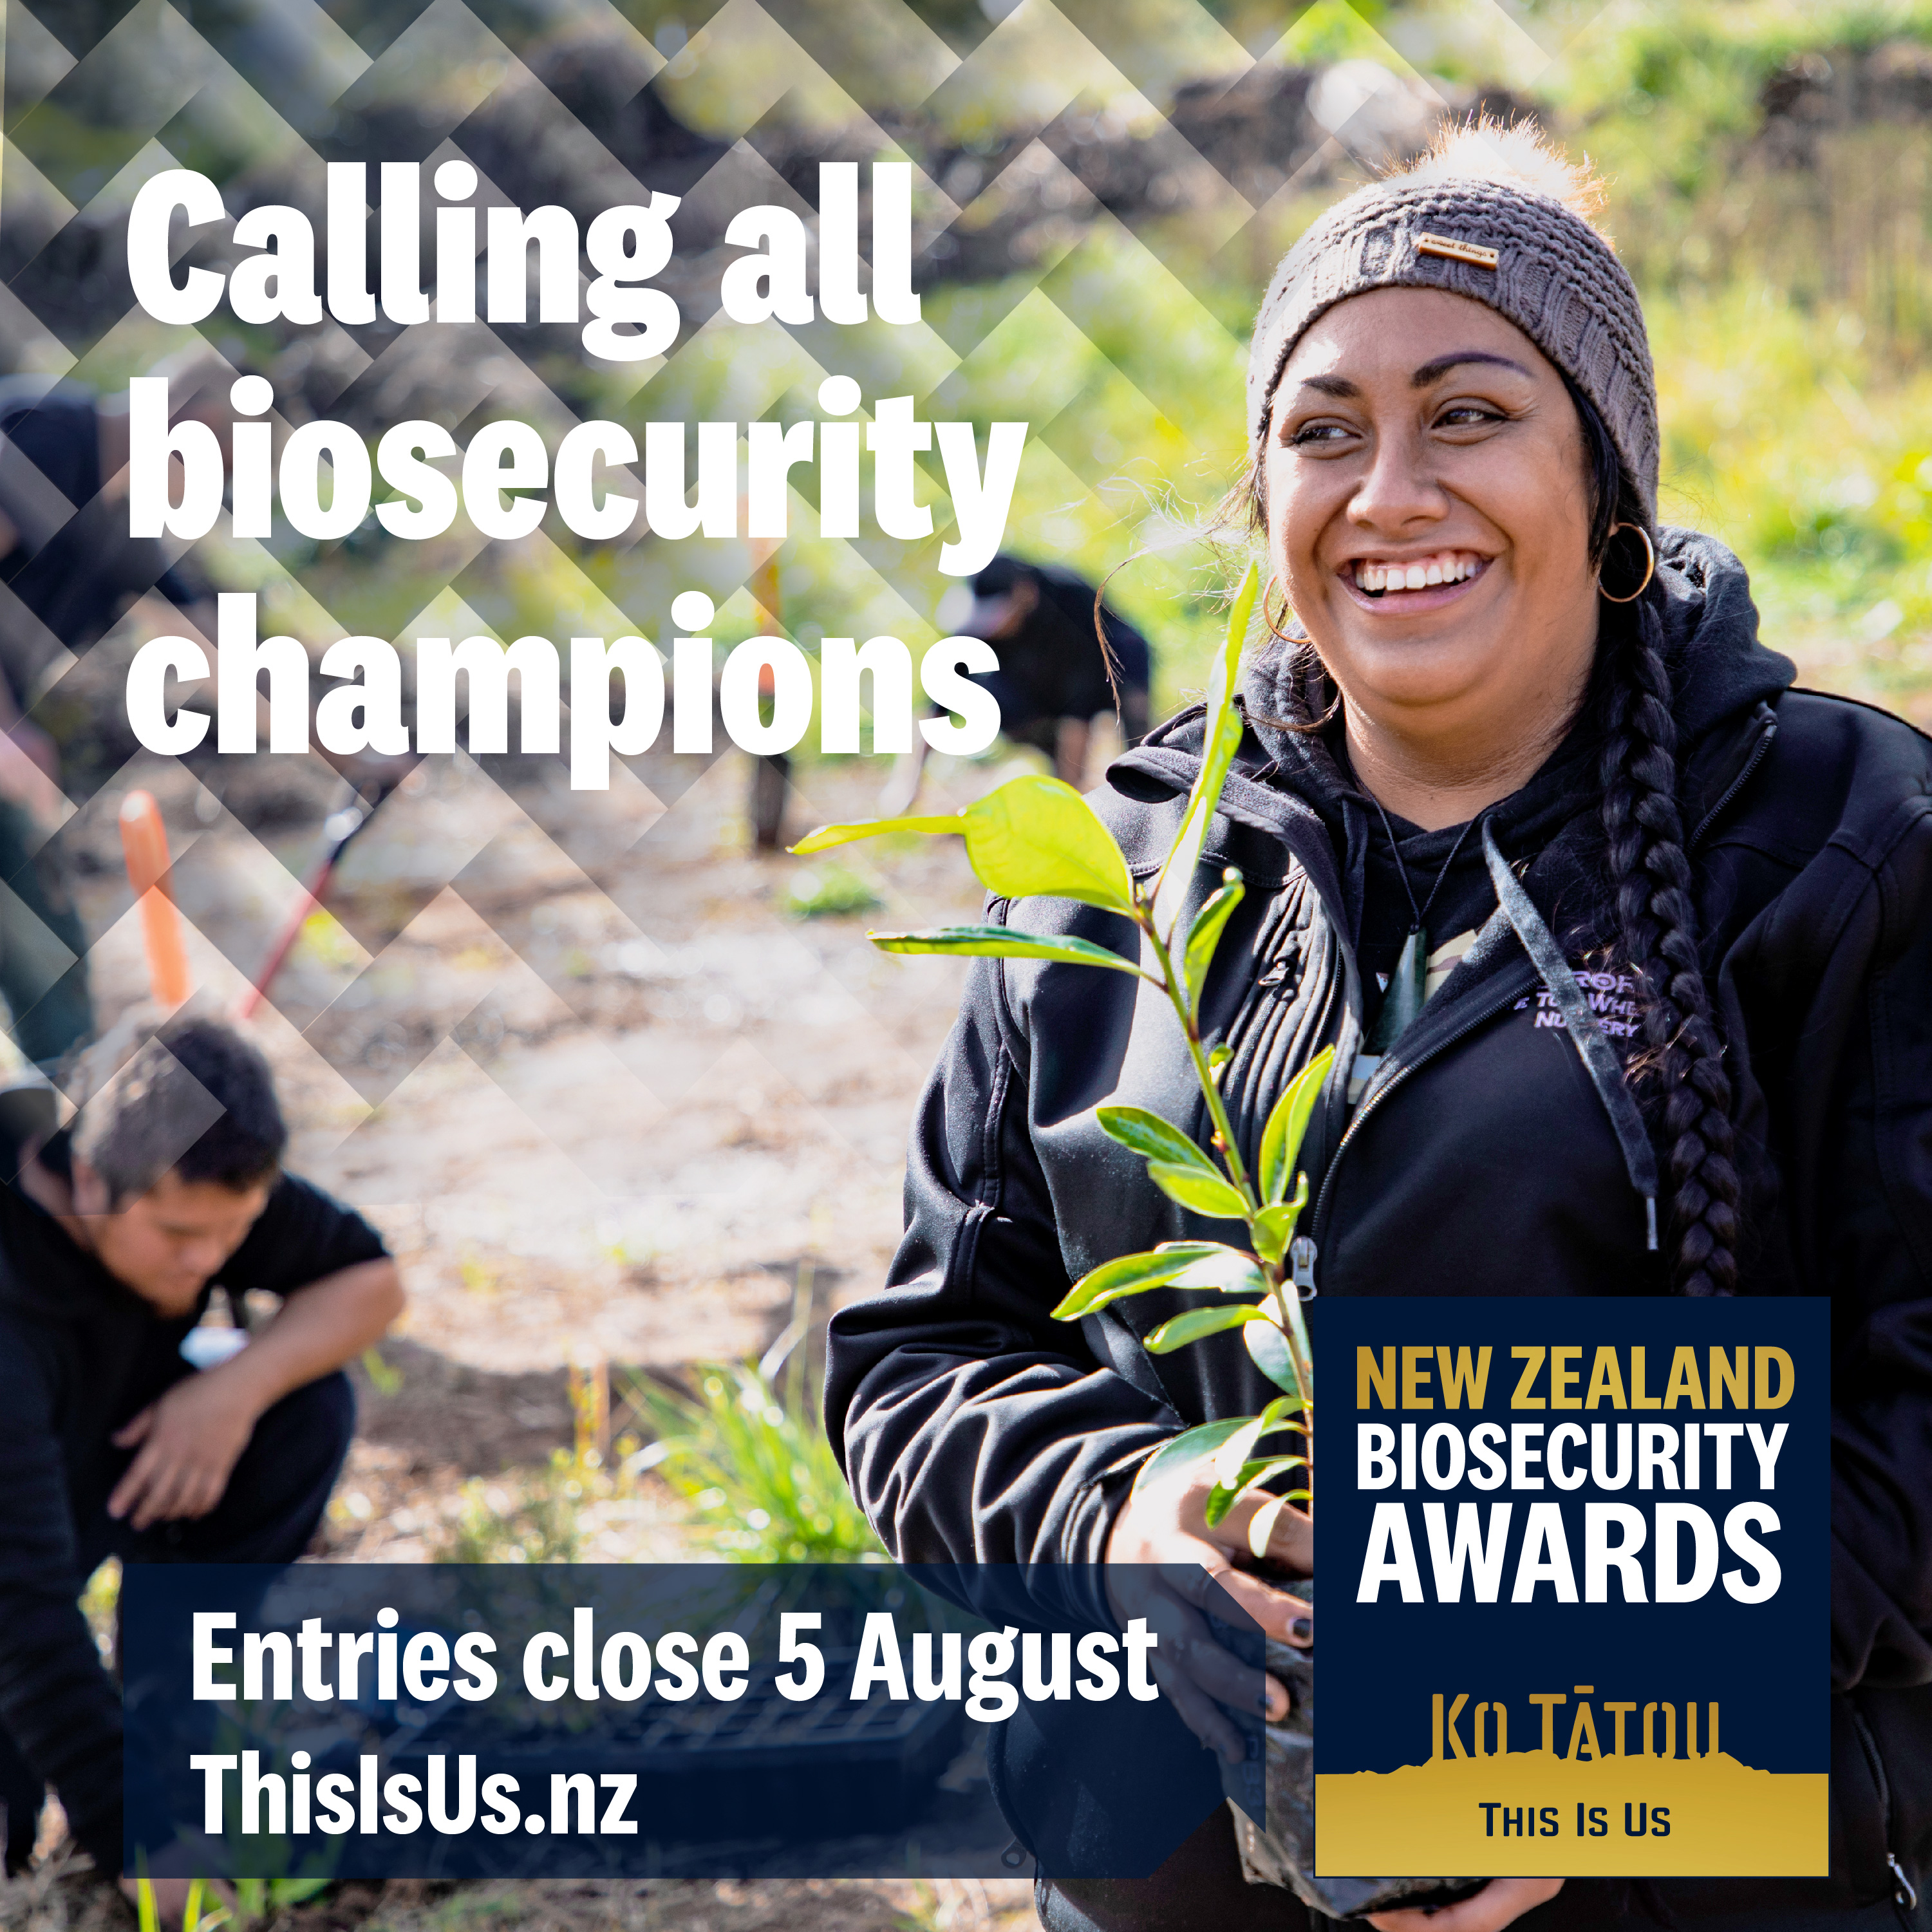 Three people at a gardening centre and one of them is holding a basket of plants. Text about the NZ Biosecurity Awards